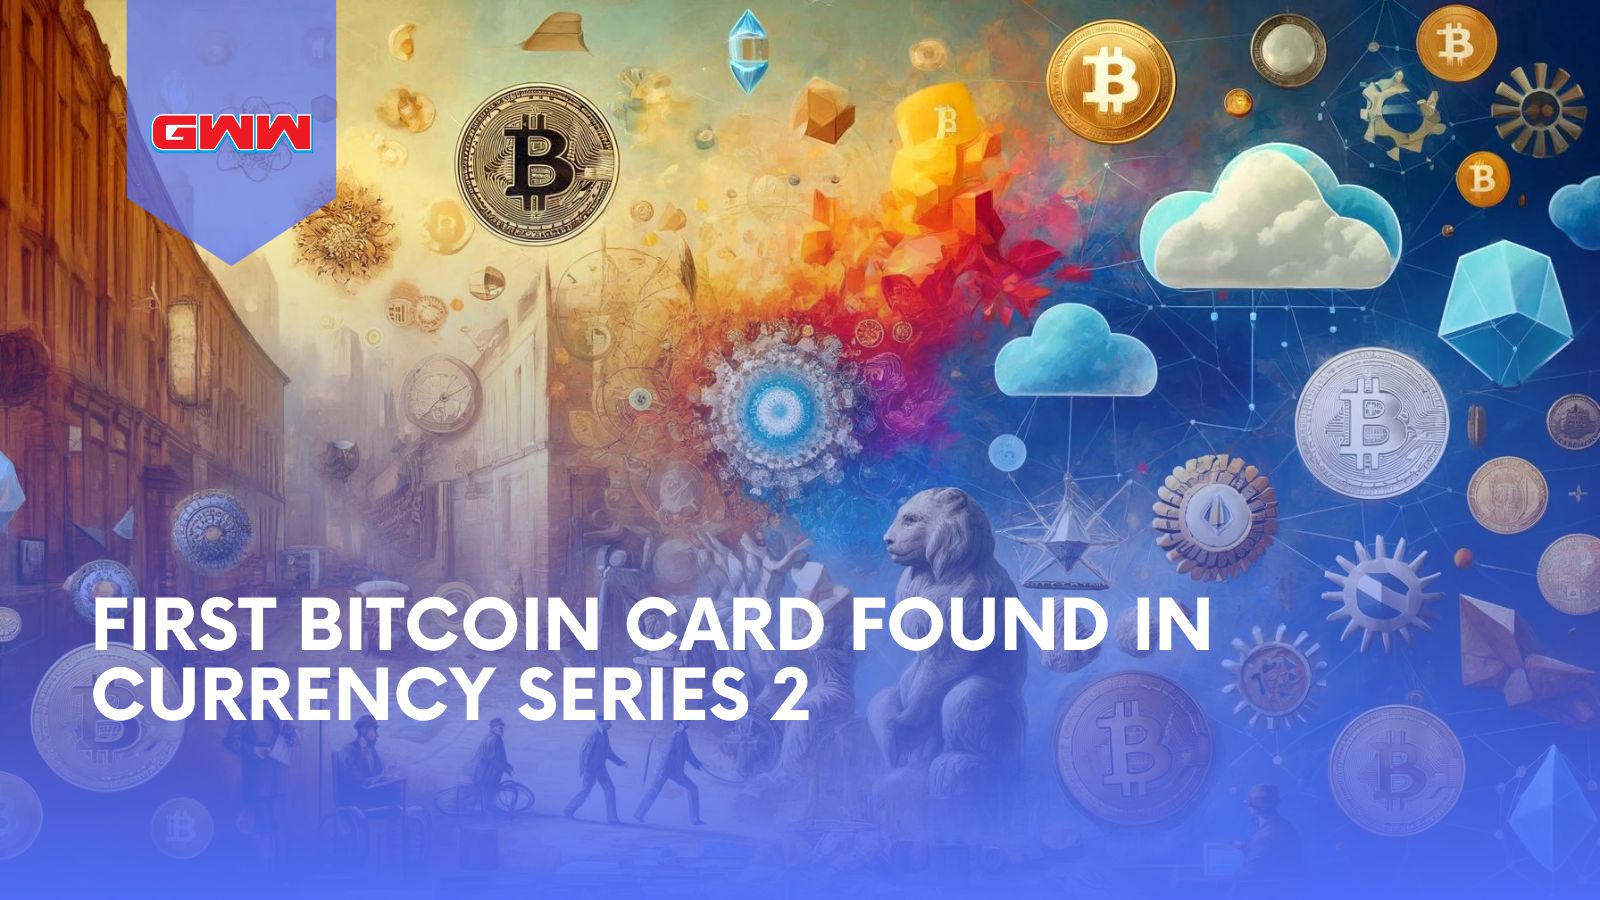 First Bitcoin Card Found in Currency Series 2